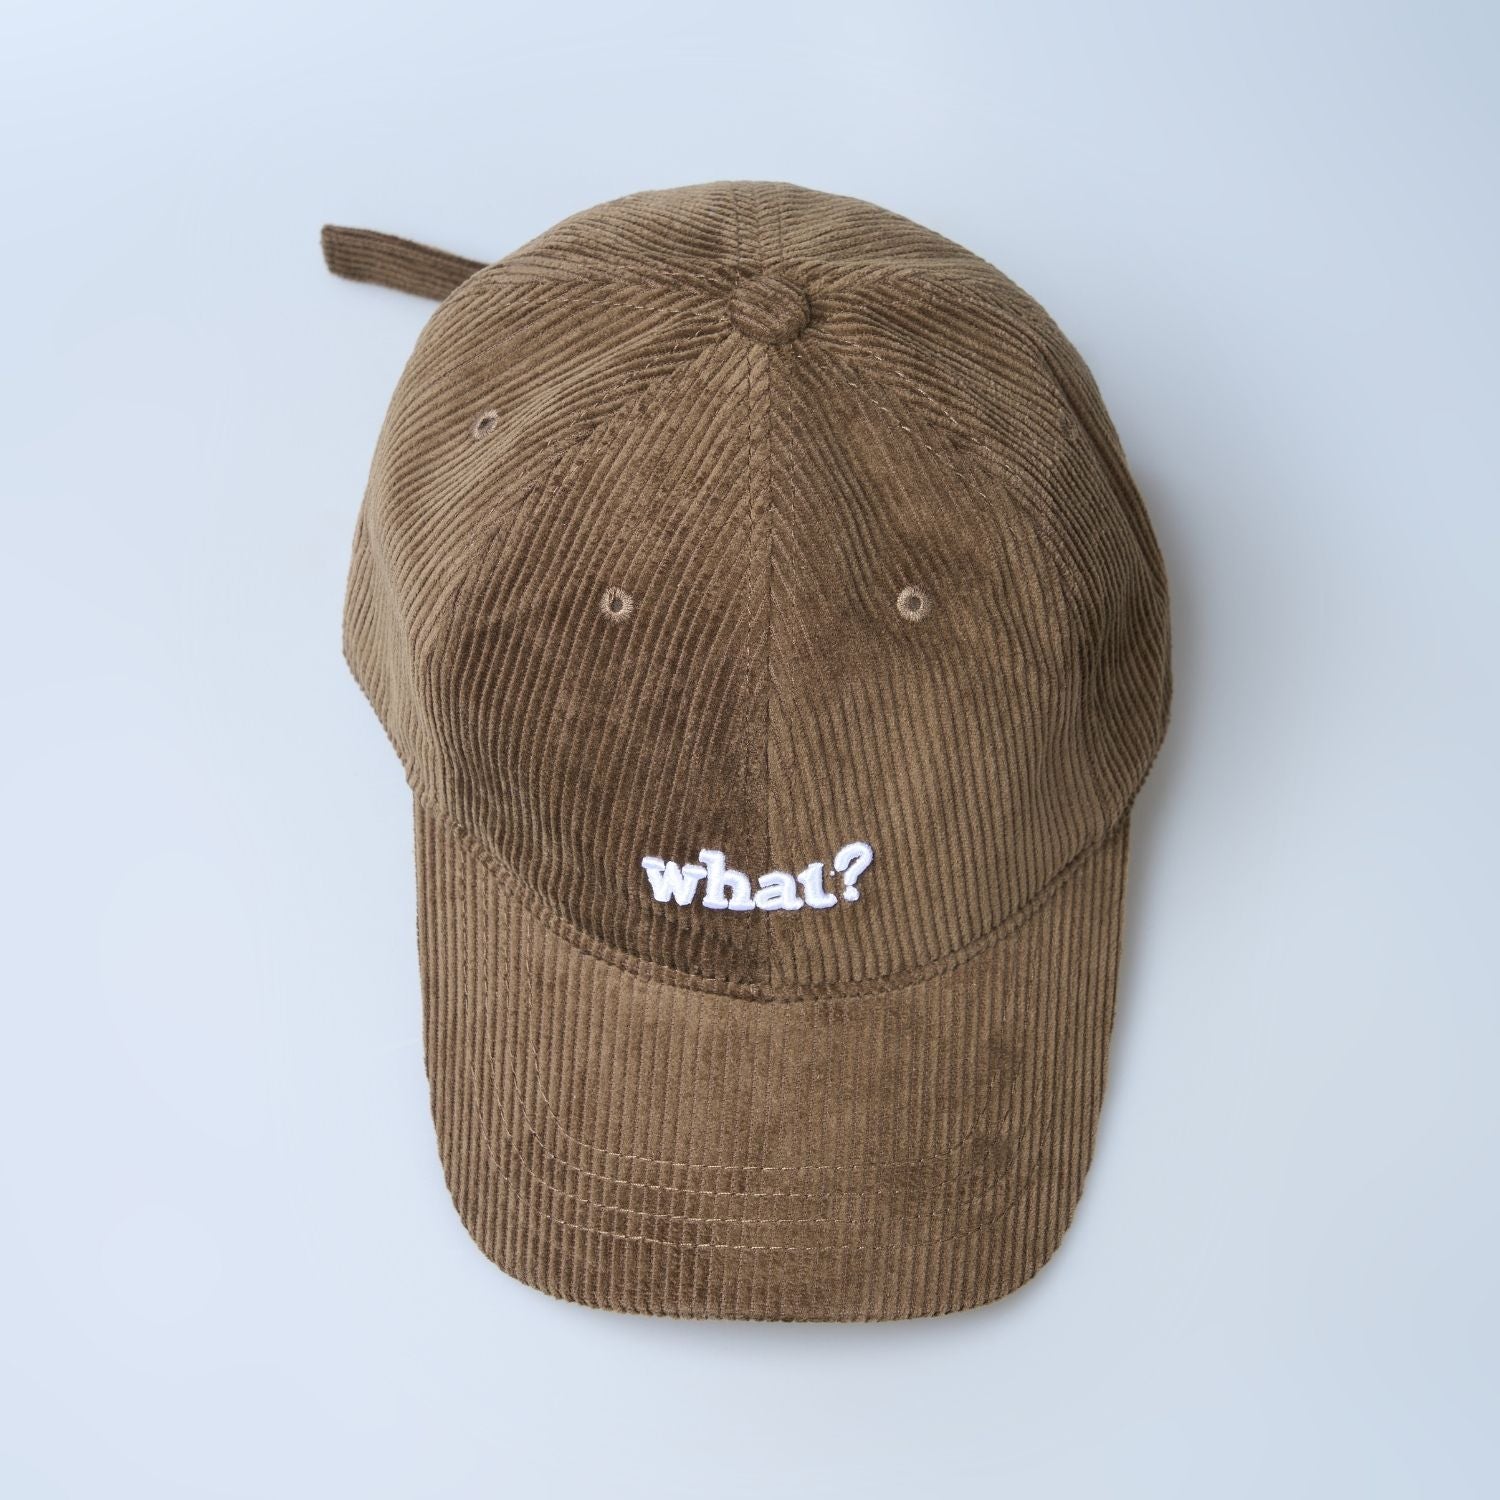 Brown colored cap for men with 'what' text written on it, top view.